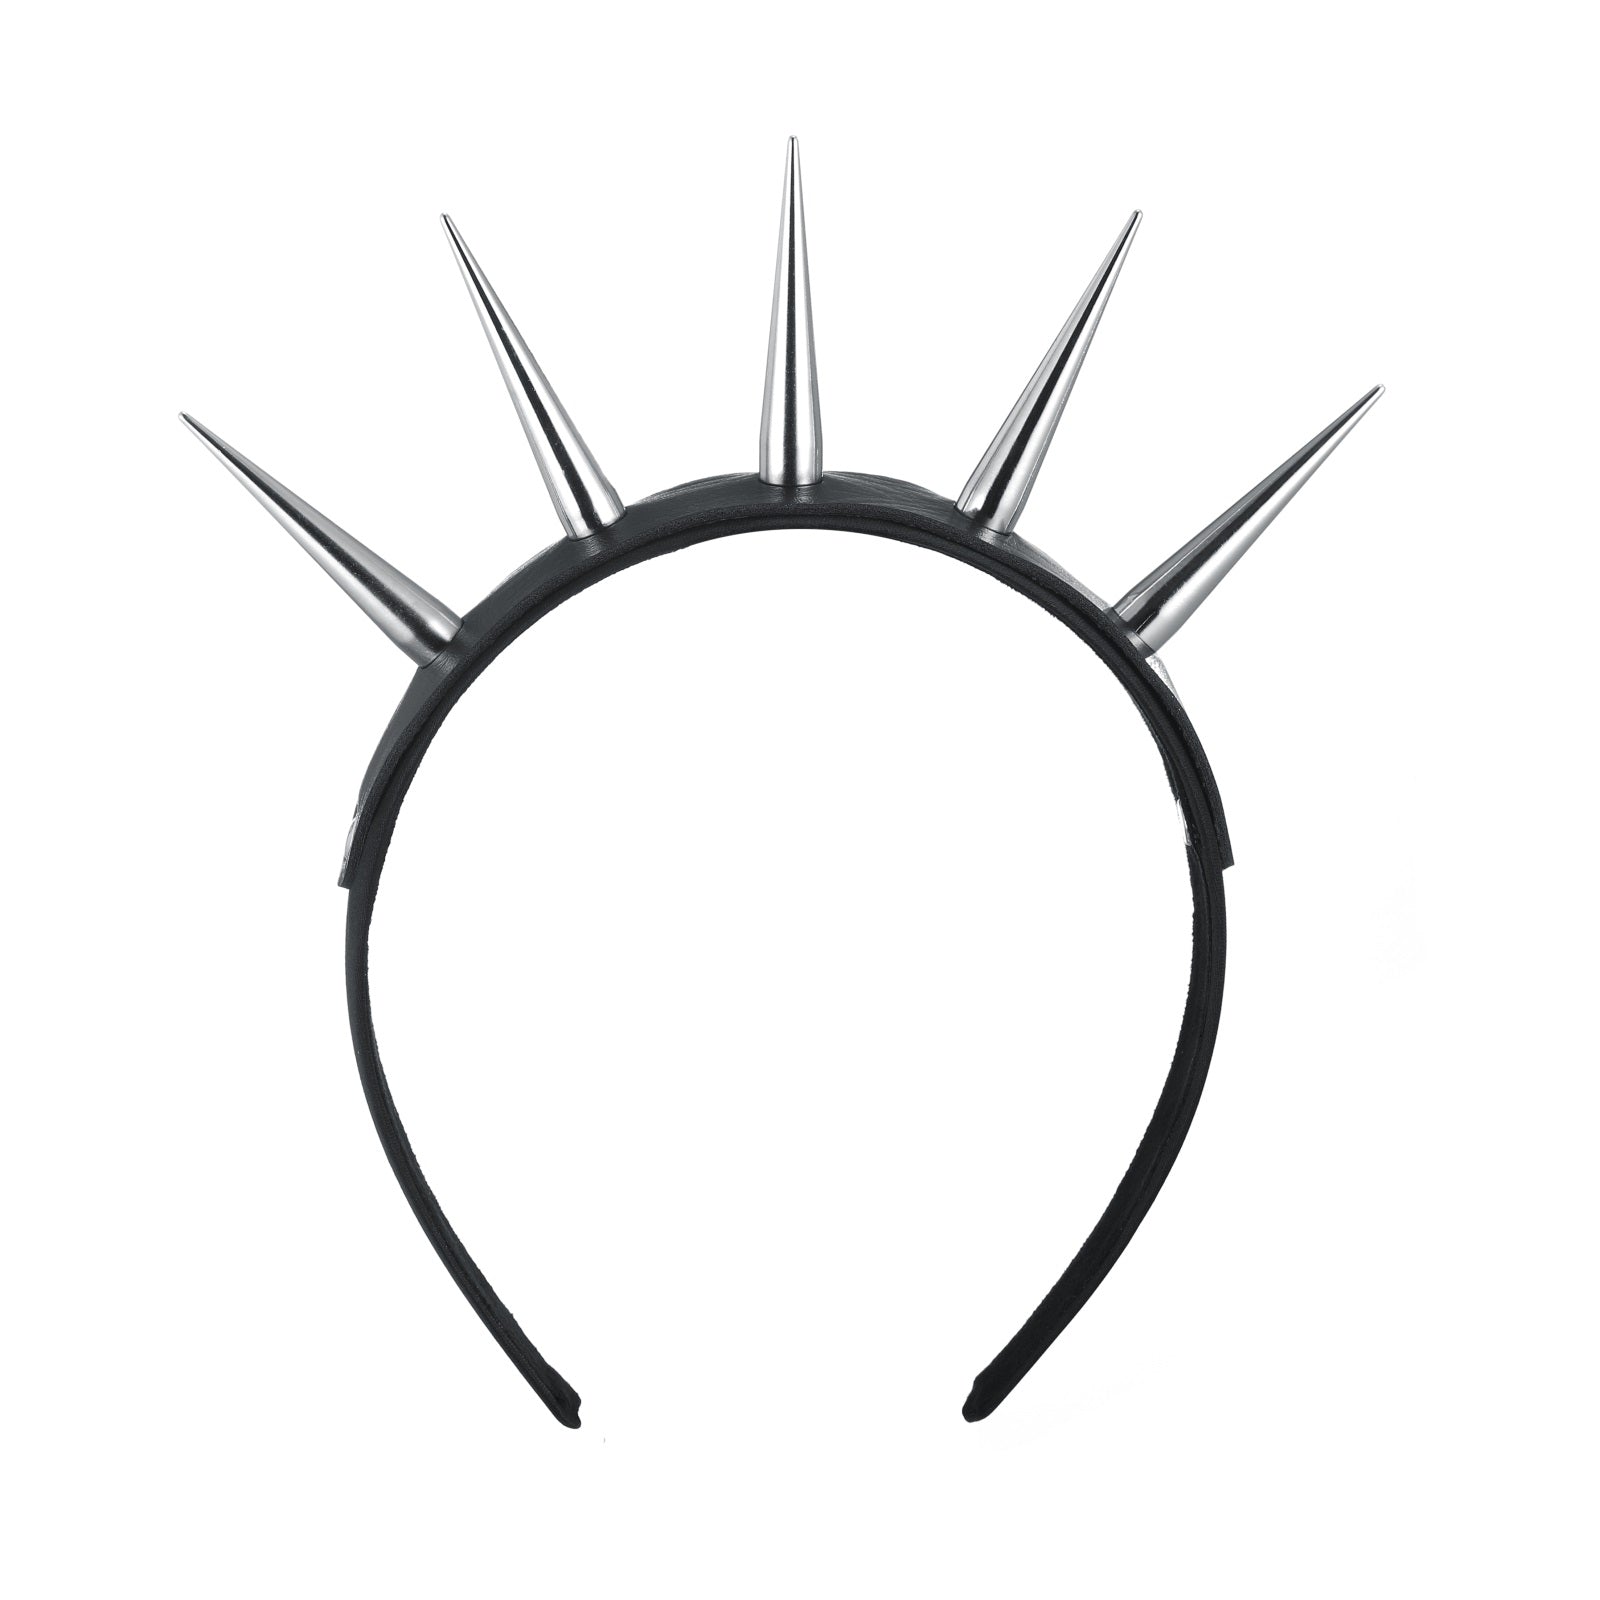 Danger Zone Spiked Headband. This headband features a black flexible band and a vegan leather strap with silver metal spikes across the top.